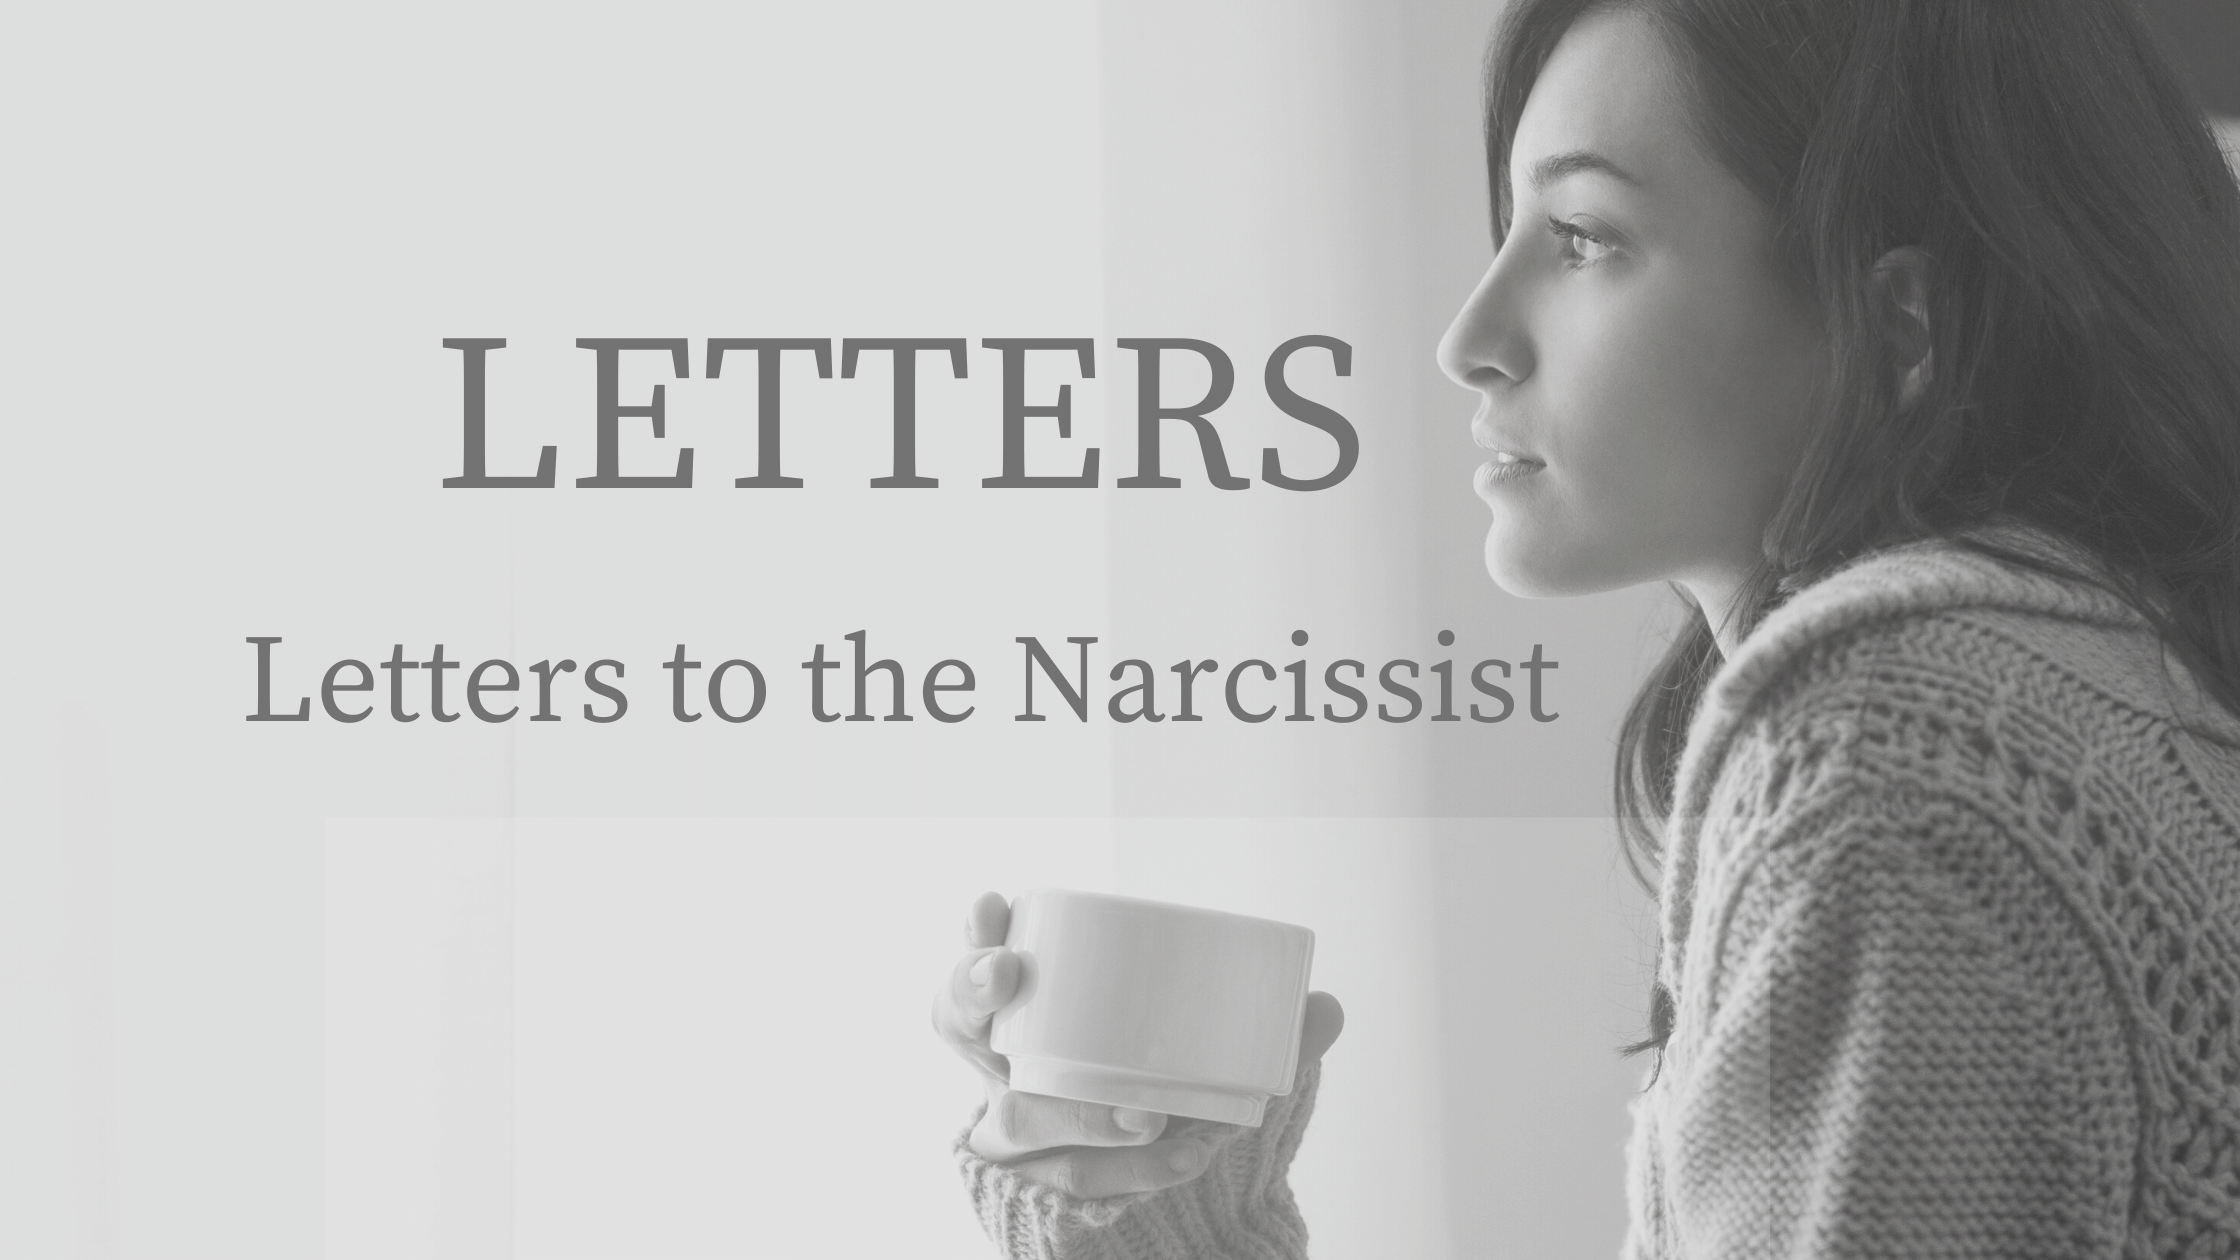 letters to a narcissist to try to change them